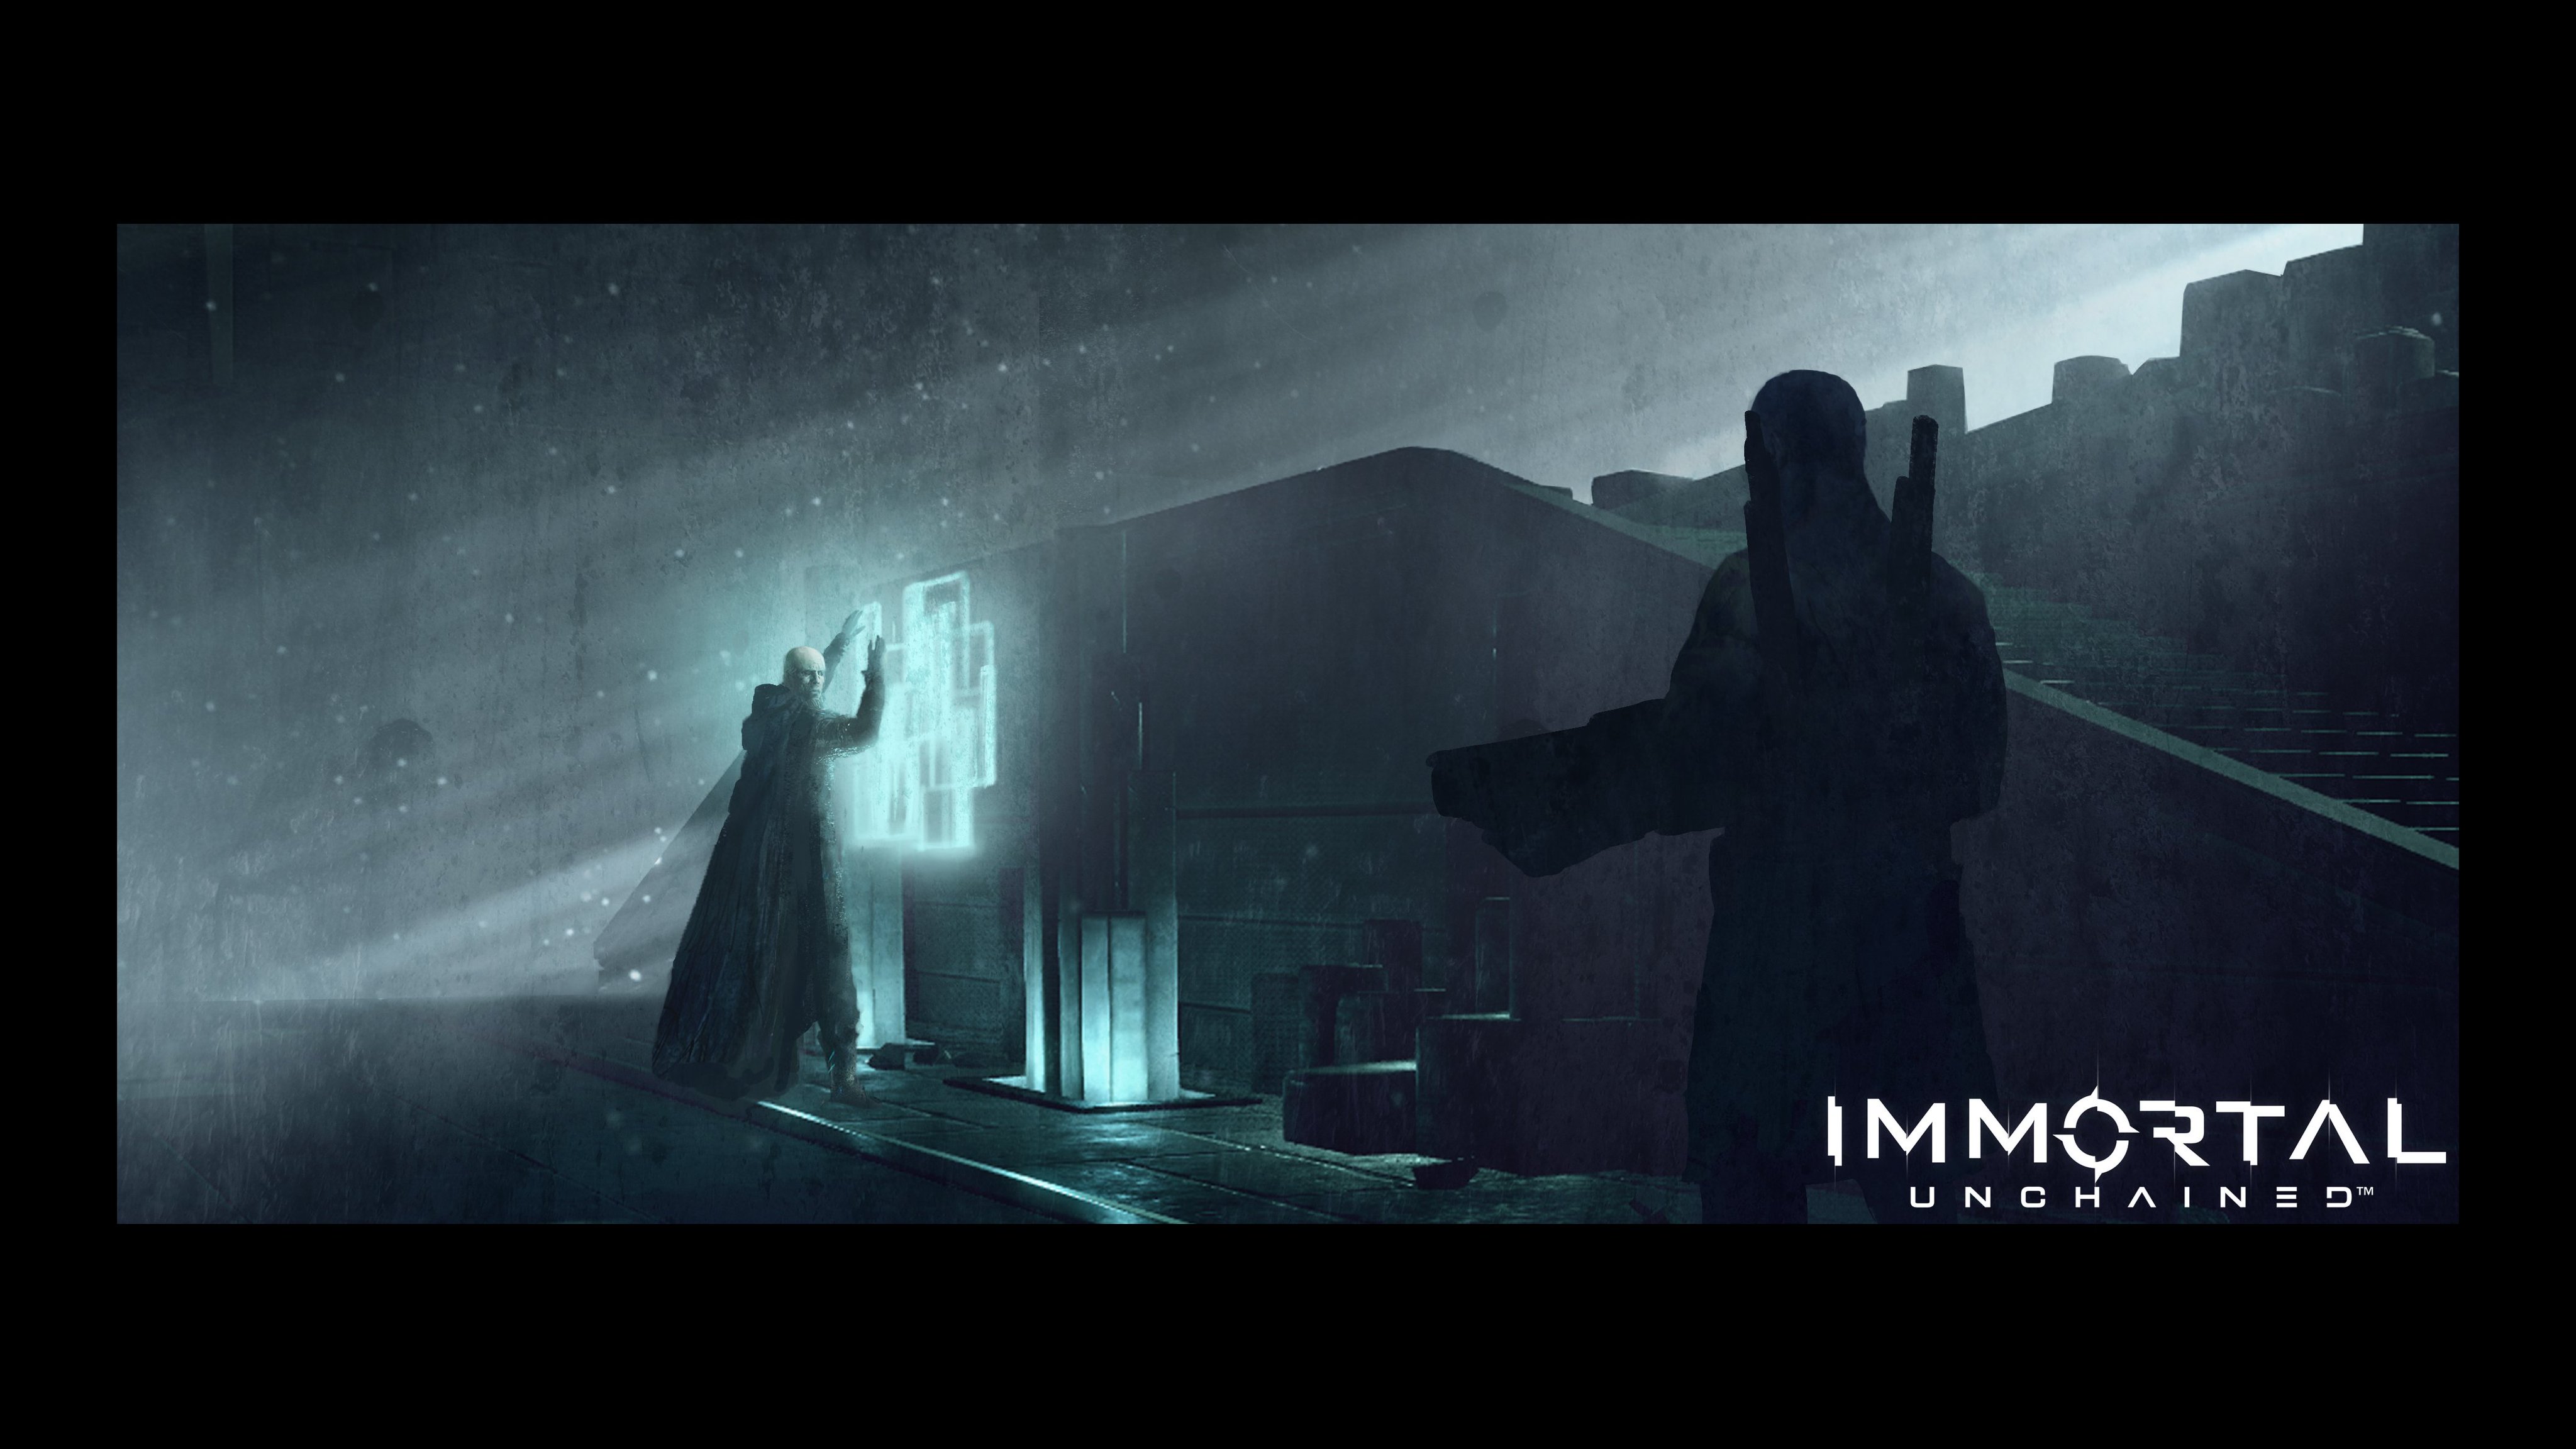 Immortal: Unchained – Not Just a Walk in the Park 